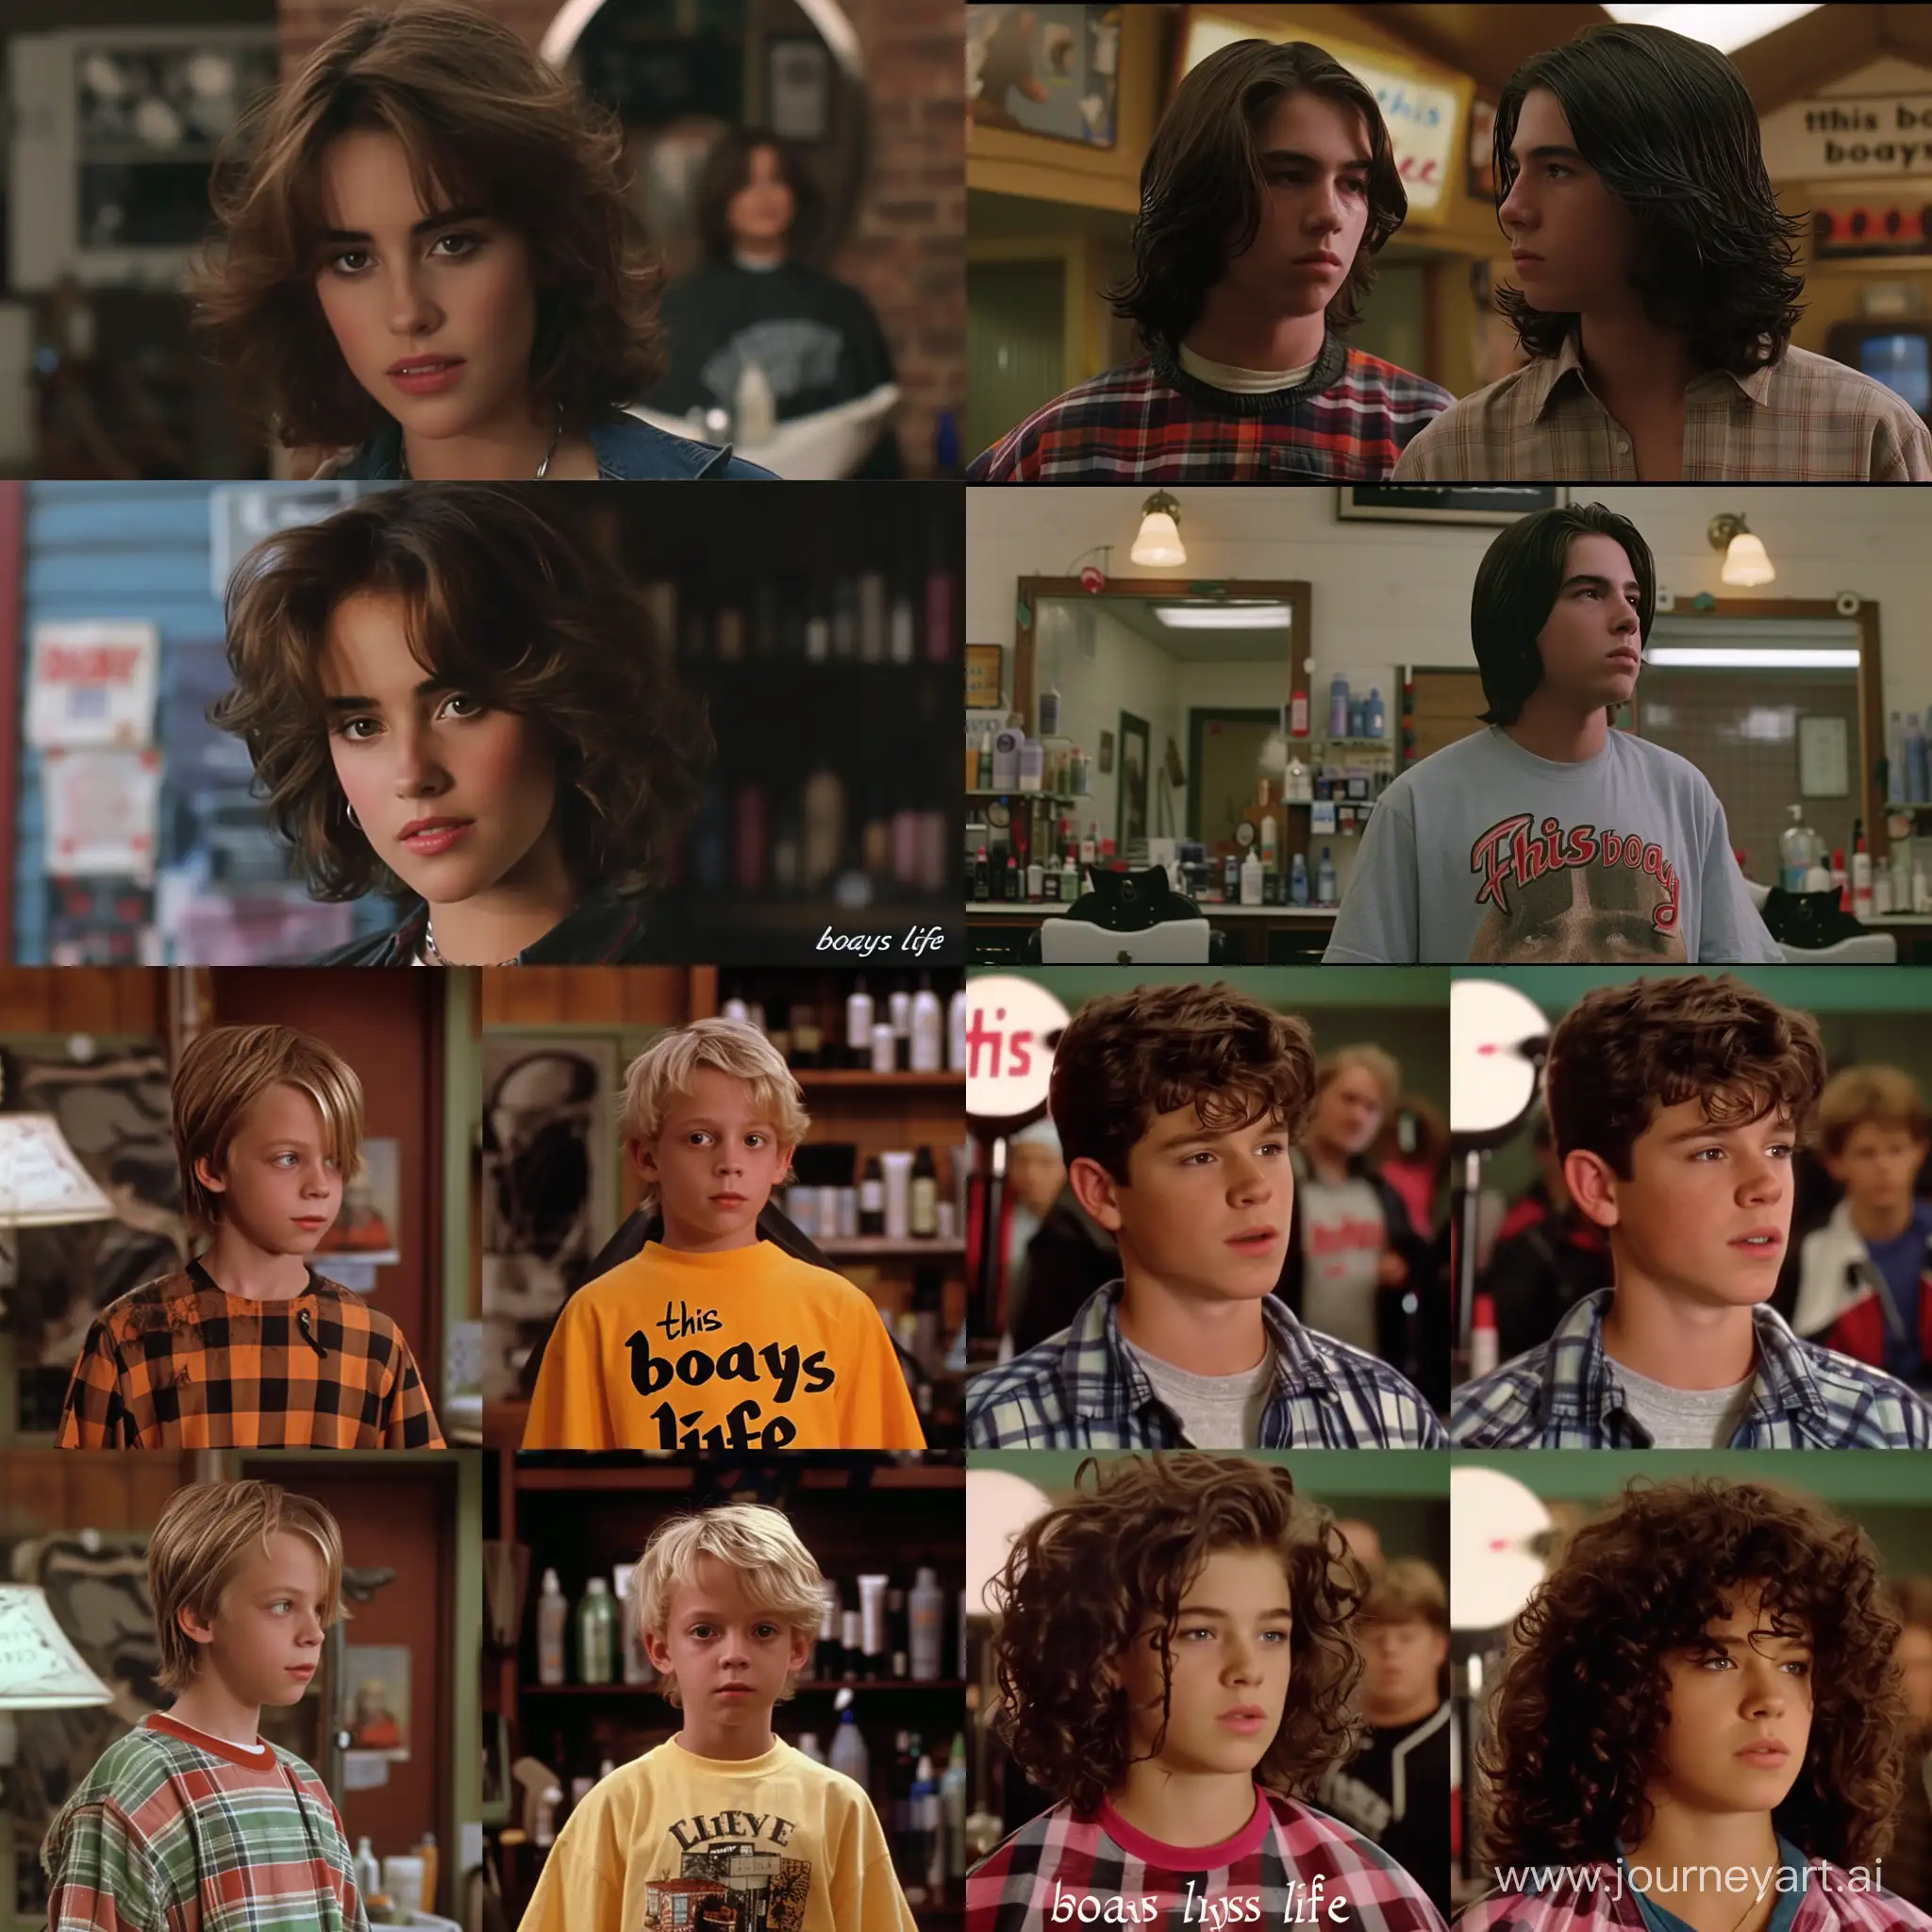 Recreating-This-Boys-Life-Haircut-Scene-Vintage-Styling-and-Nostalgic-Vibes